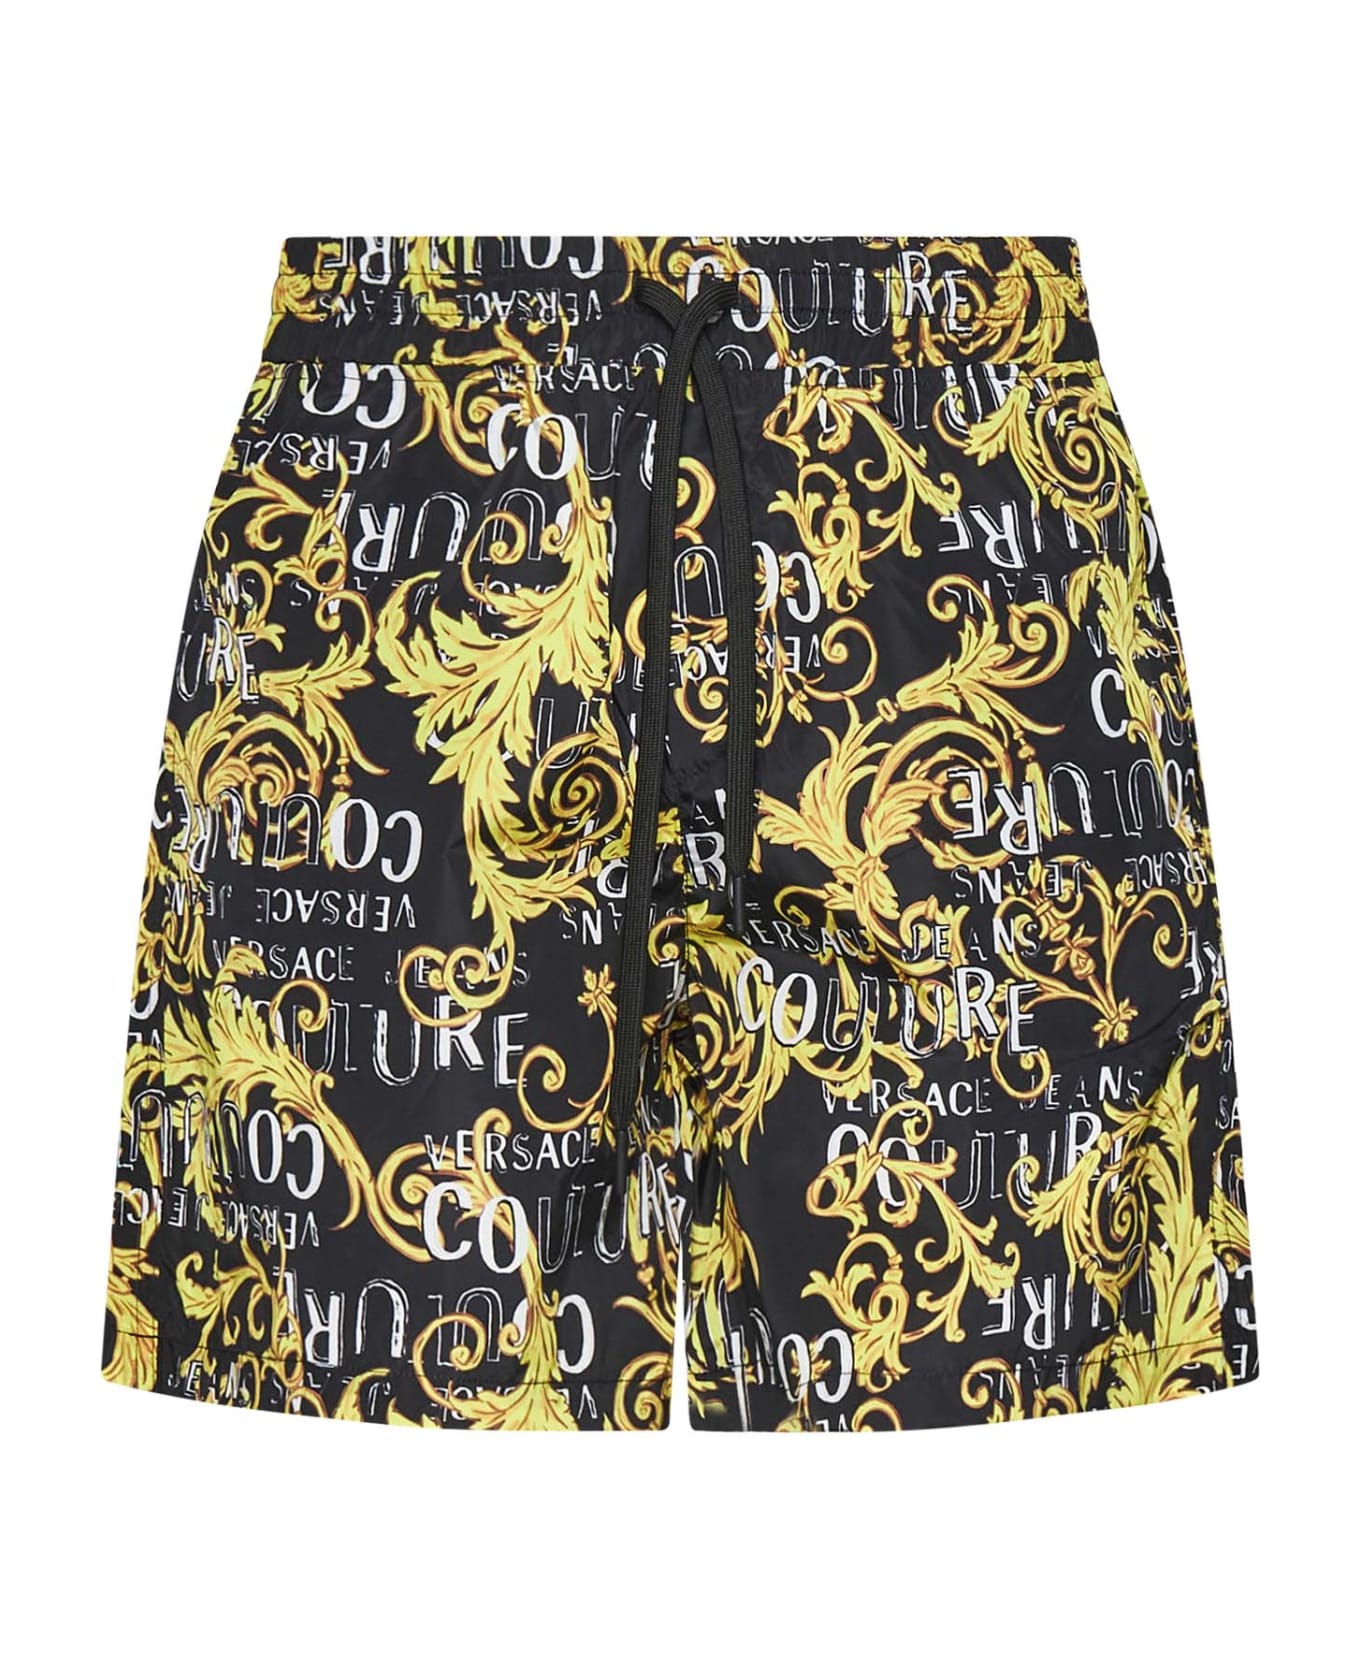 Versace Jeans Couture Shorts - Black Gold ショートパンツ